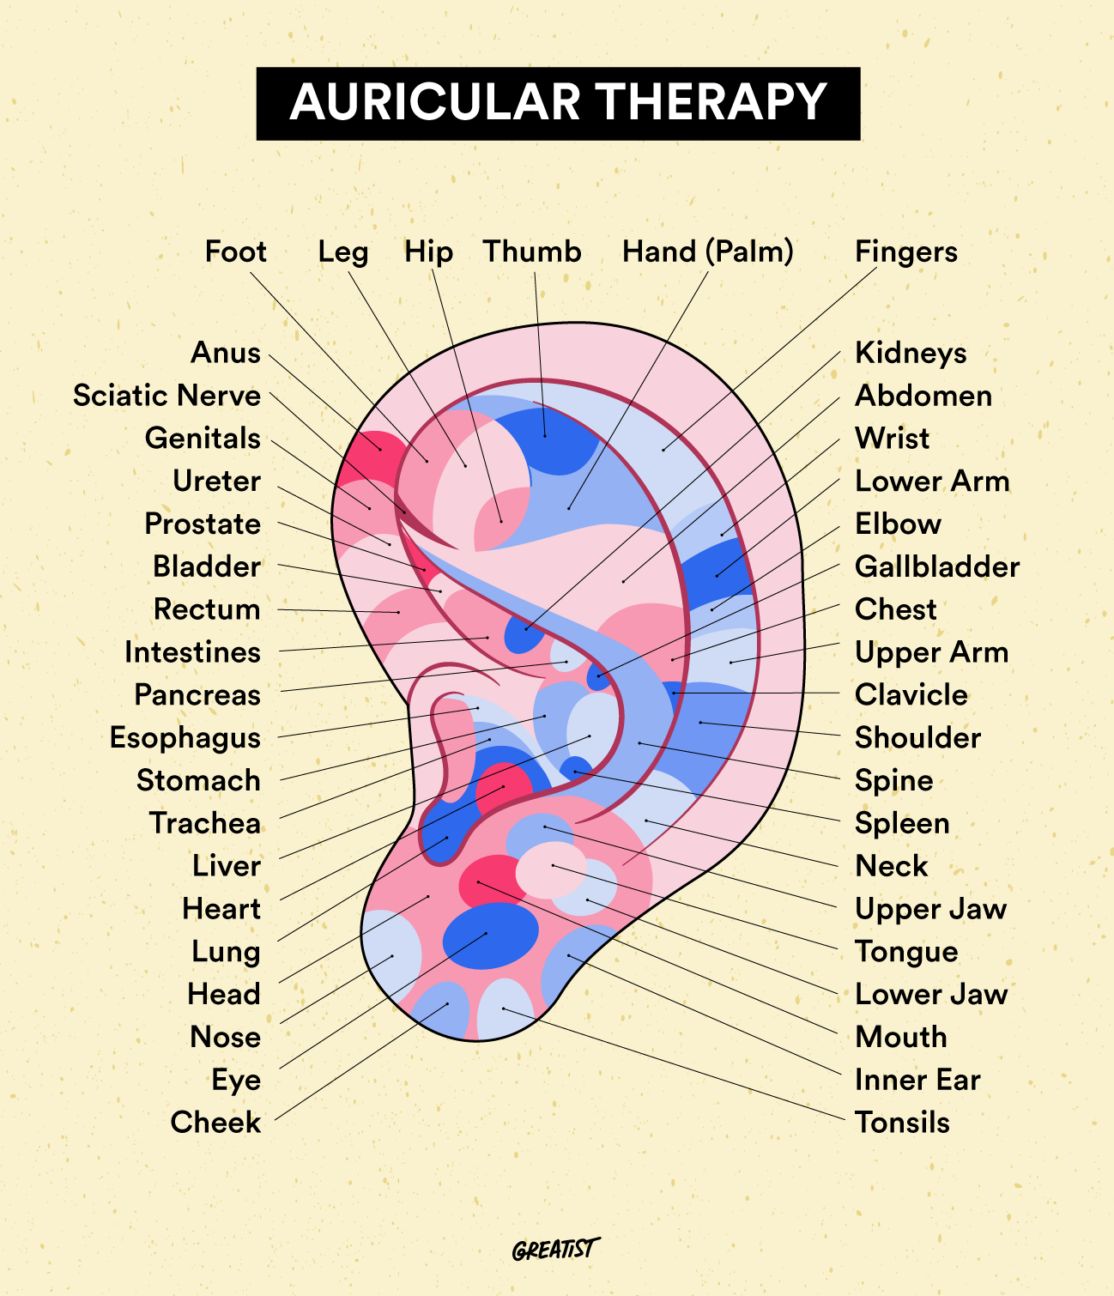 Auricular therapy chart